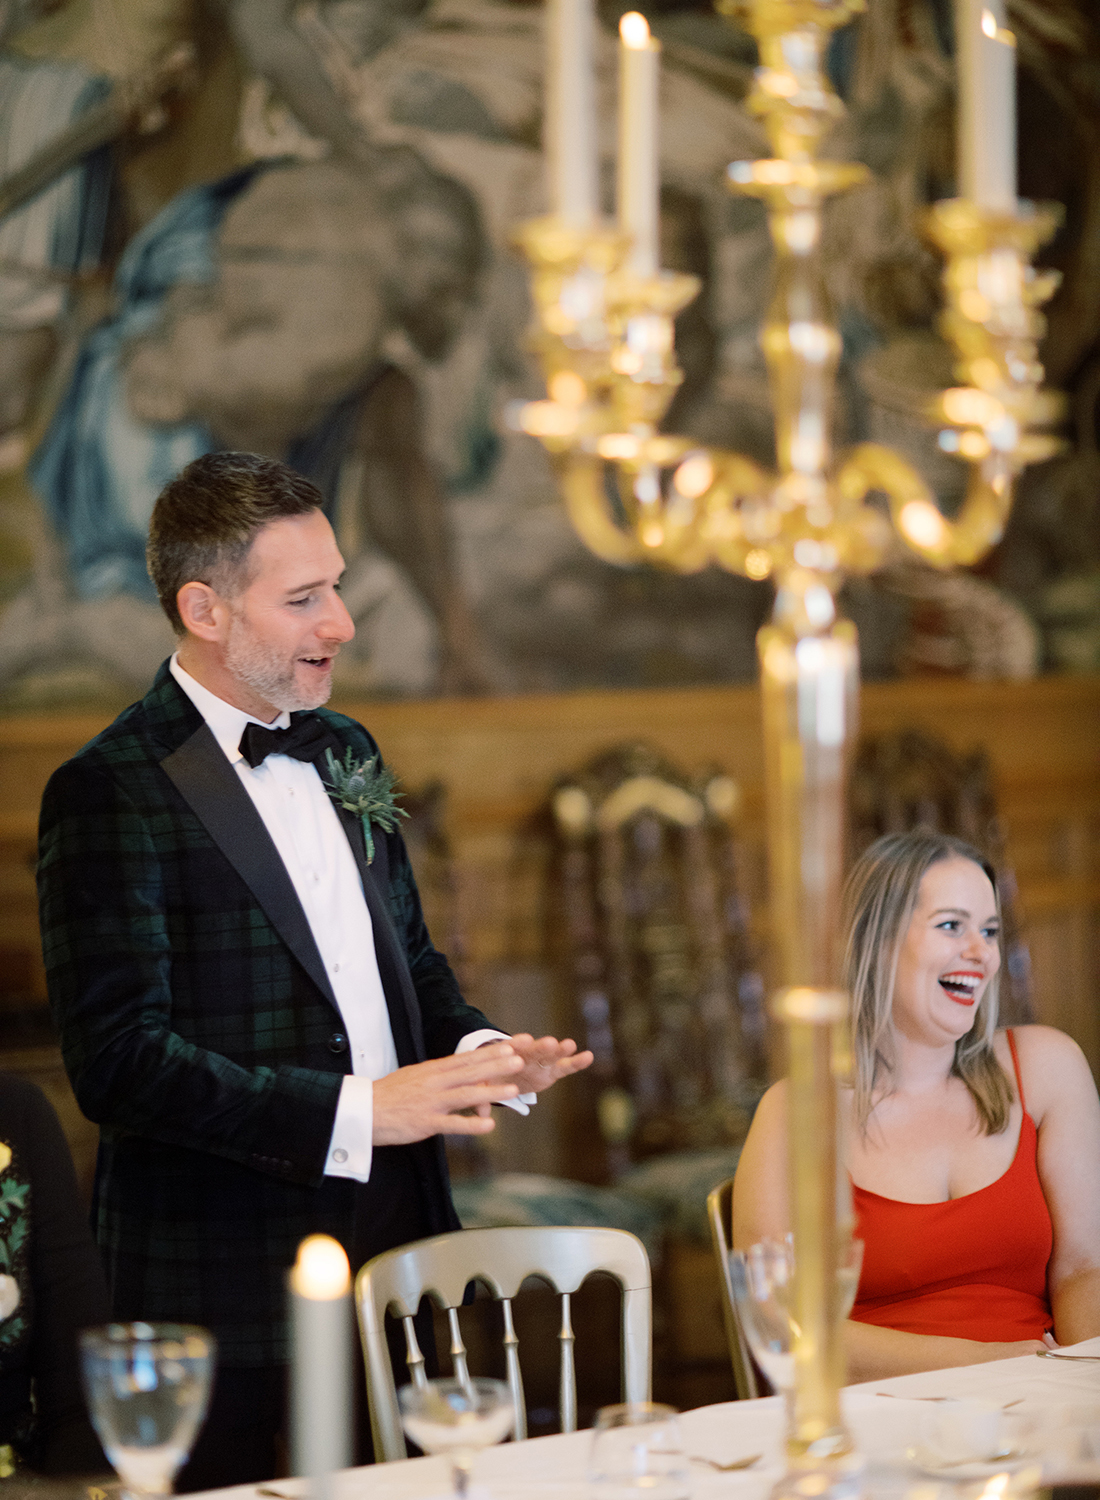 Speech time at this black tie surprise party at Fyvie Castle in Scotland